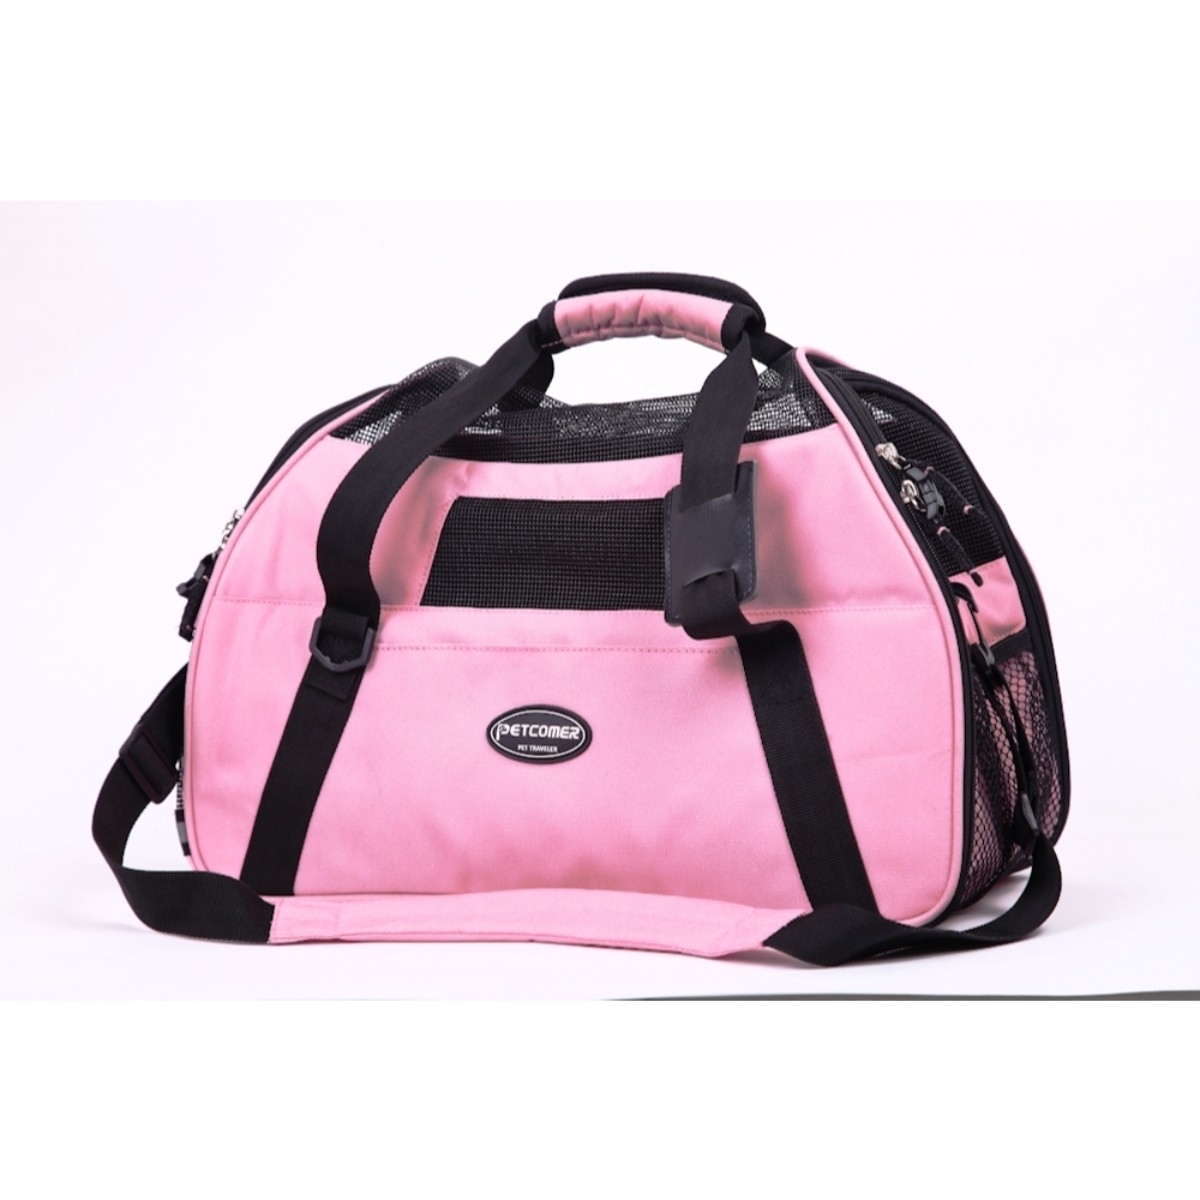 MKF Collection By Mia K. Handbag Doggy Boo Front Dog Carrier For Small Dogs - Pink Black